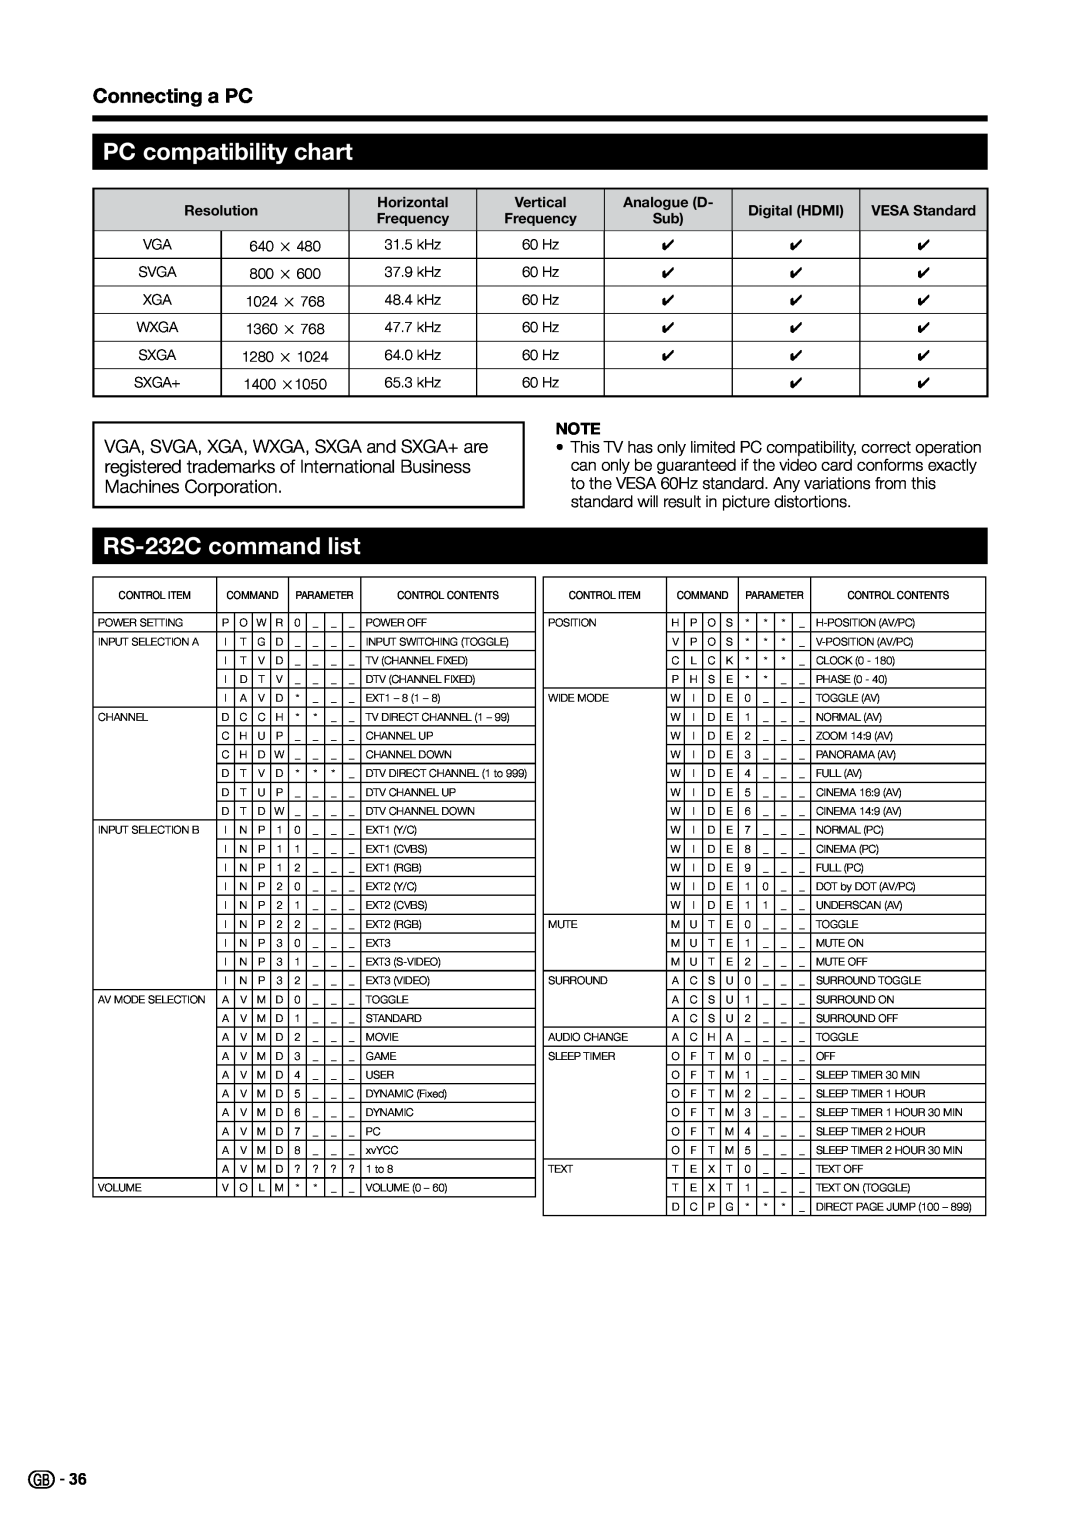 Sharp LC-32B20S, LC-37B20S, LC-37G20E, LC-37B20E, LC-37G20S PC compatibility chart, RS-232C command list, Connecting a PC 